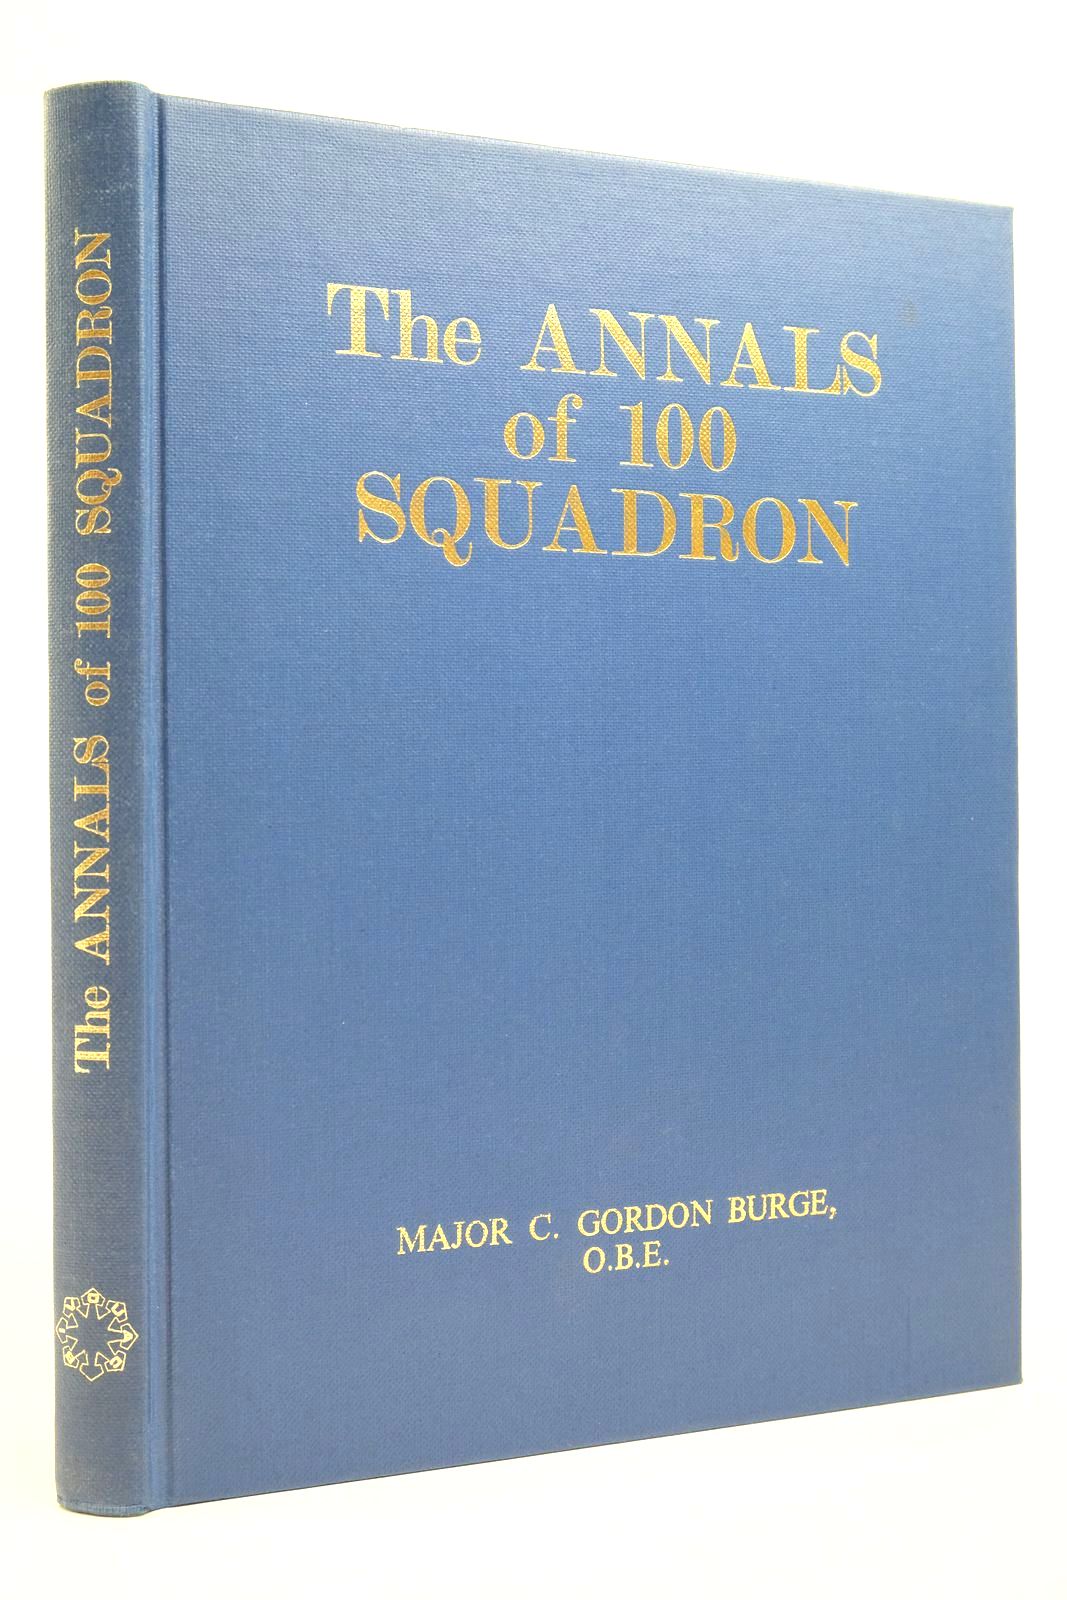 Photo of THE ANNALS OF 100 SQUADRON written by Burge, C. Gordon Trenchard, Hugh published by Bivouac Books (STOCK CODE: 2139948)  for sale by Stella & Rose's Books